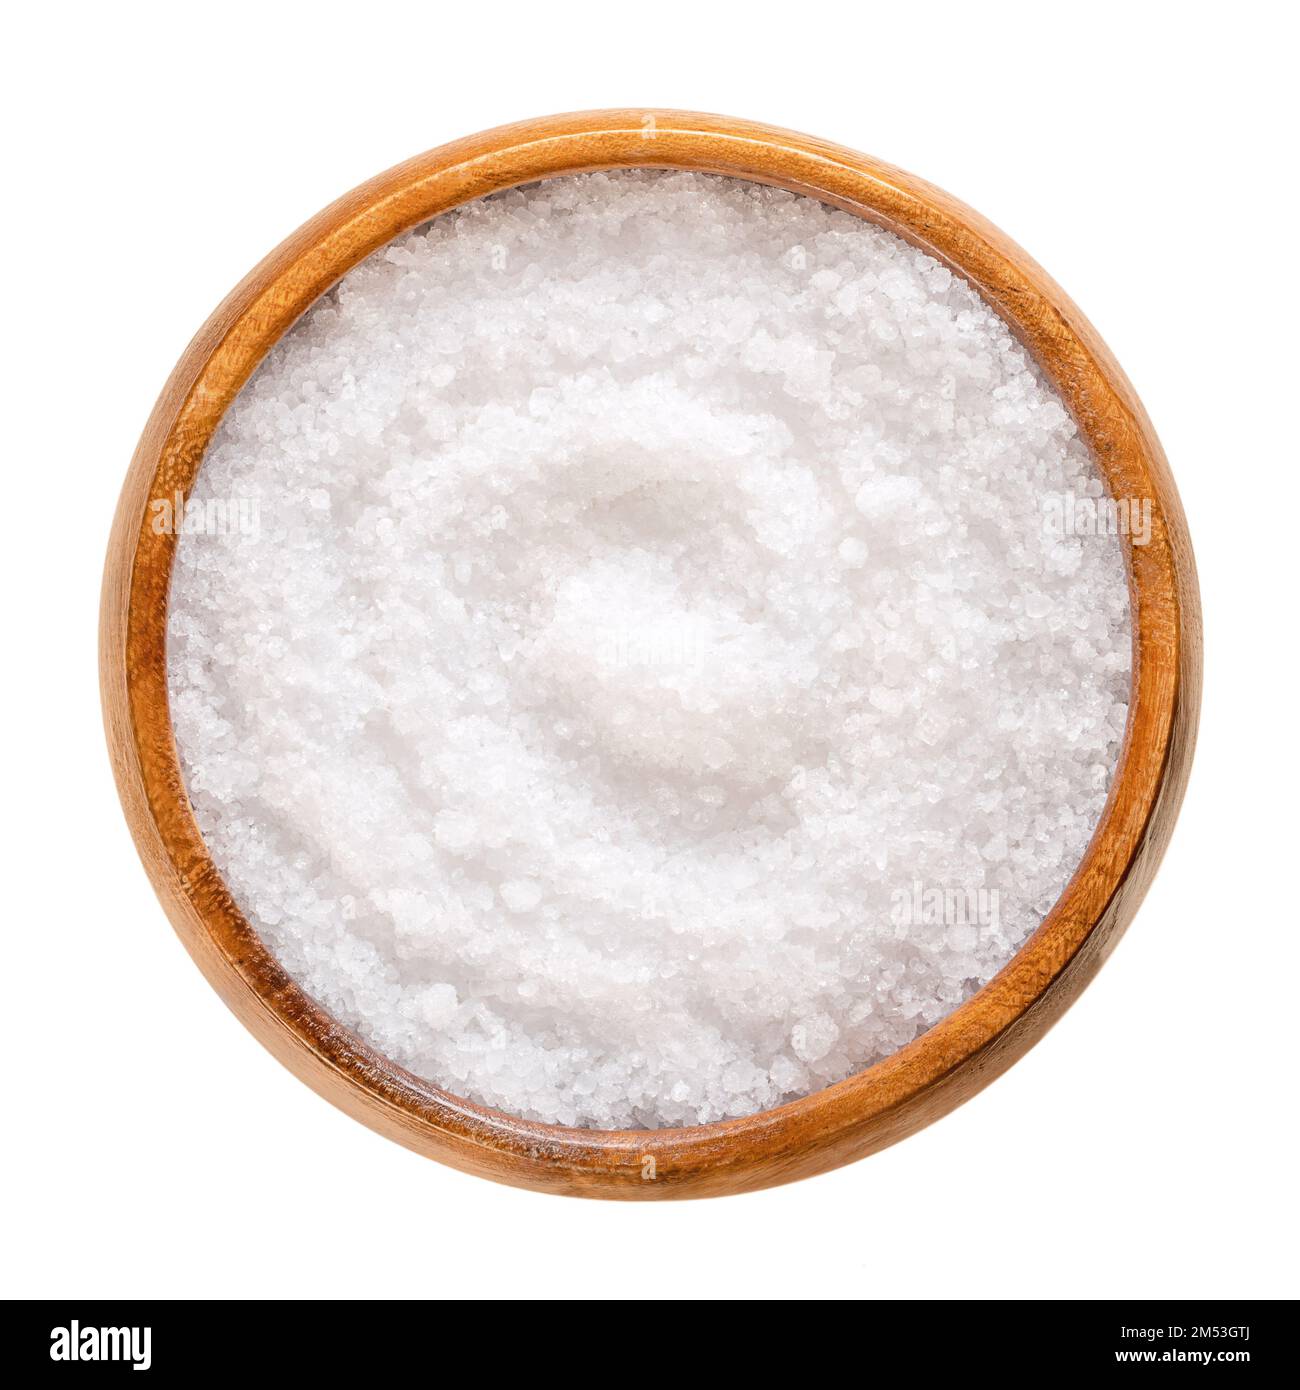 Fleur de sel, sea salt, in a wooden bowl. Also known as flor de sal, a salt that forms a thin, delicate crust on the sea water that evaporates. Stock Photo